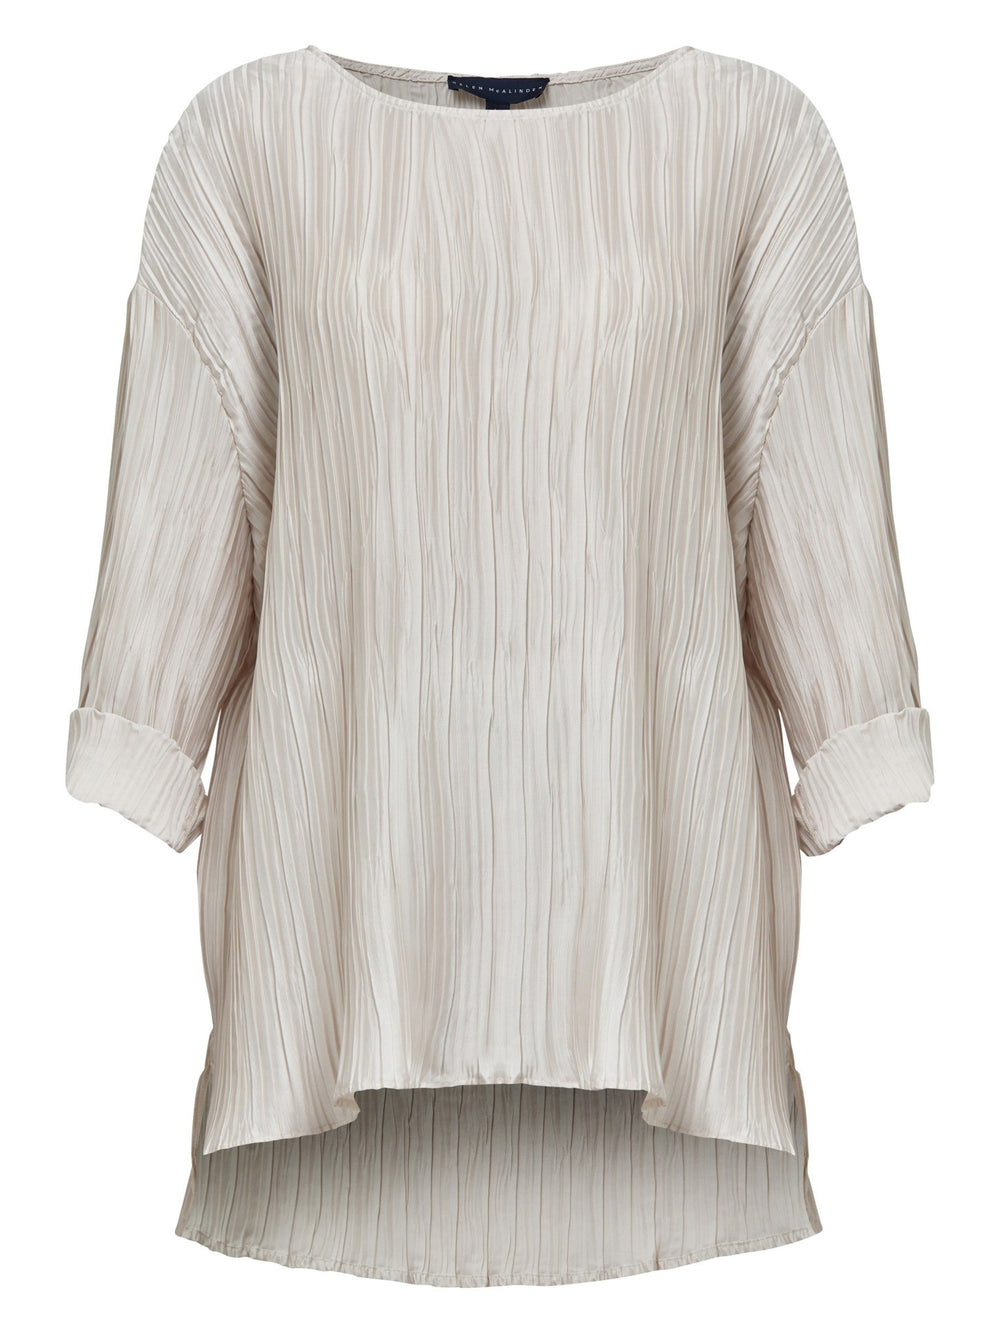 Helen McAlinden pleated blouse in ivory with loose fitting